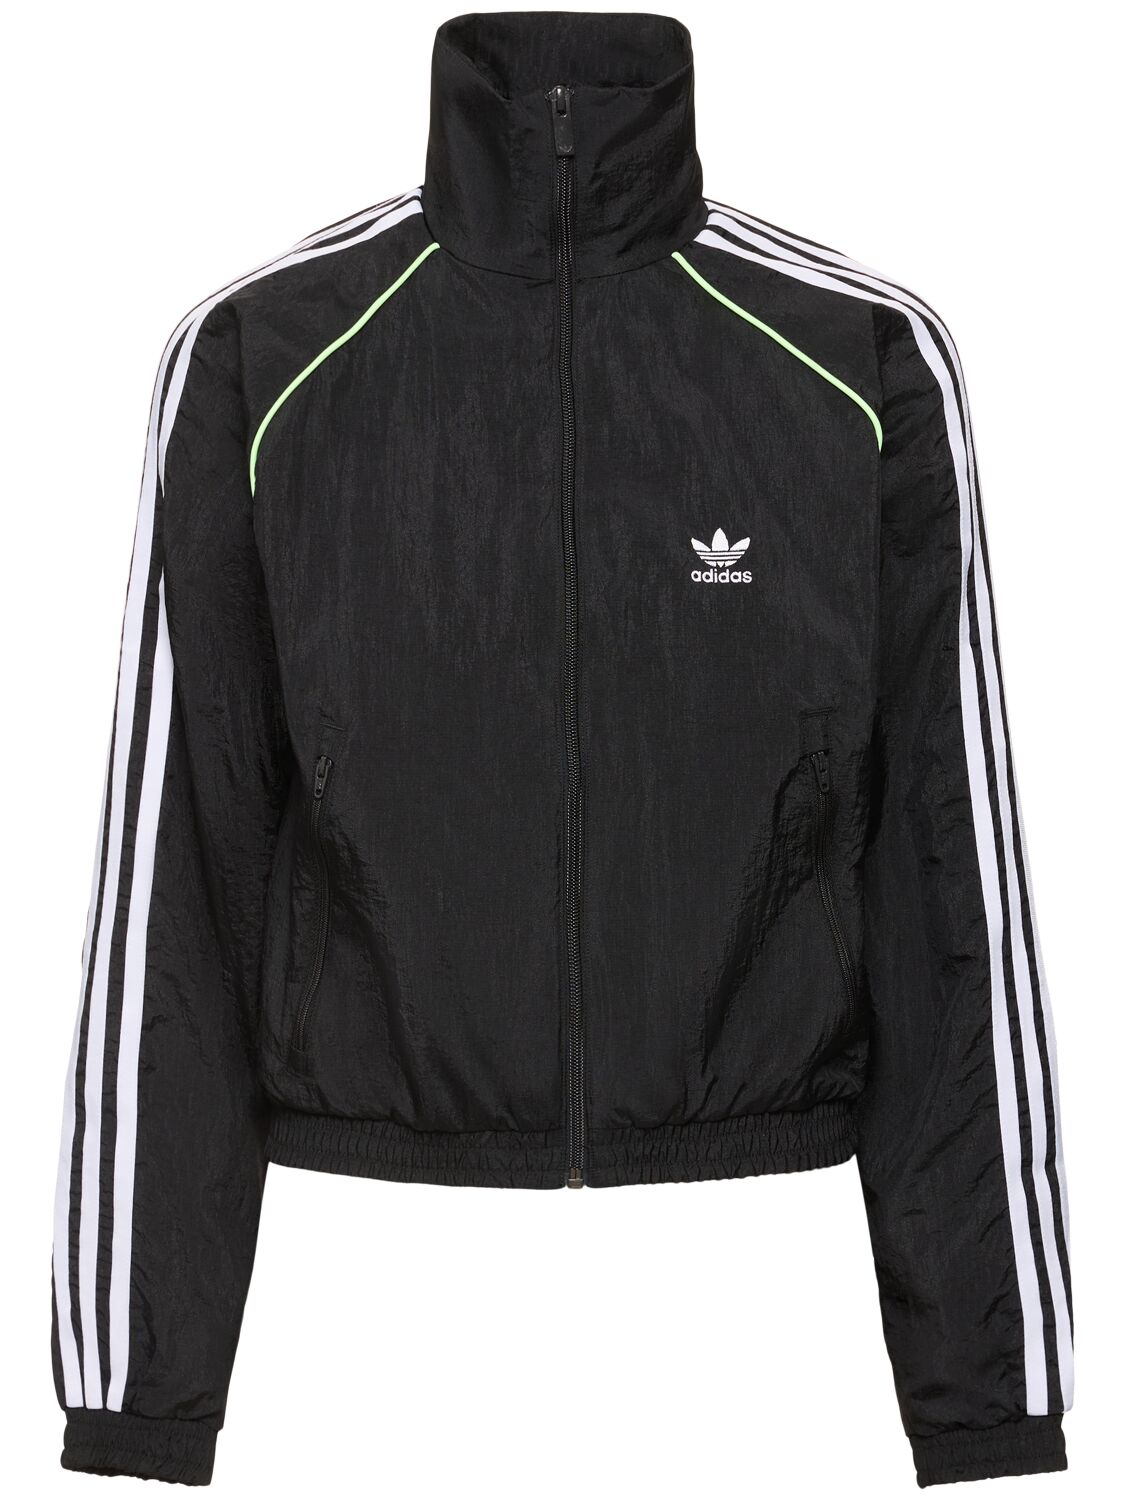 Image of 3-stripes Tech Zip Track Top